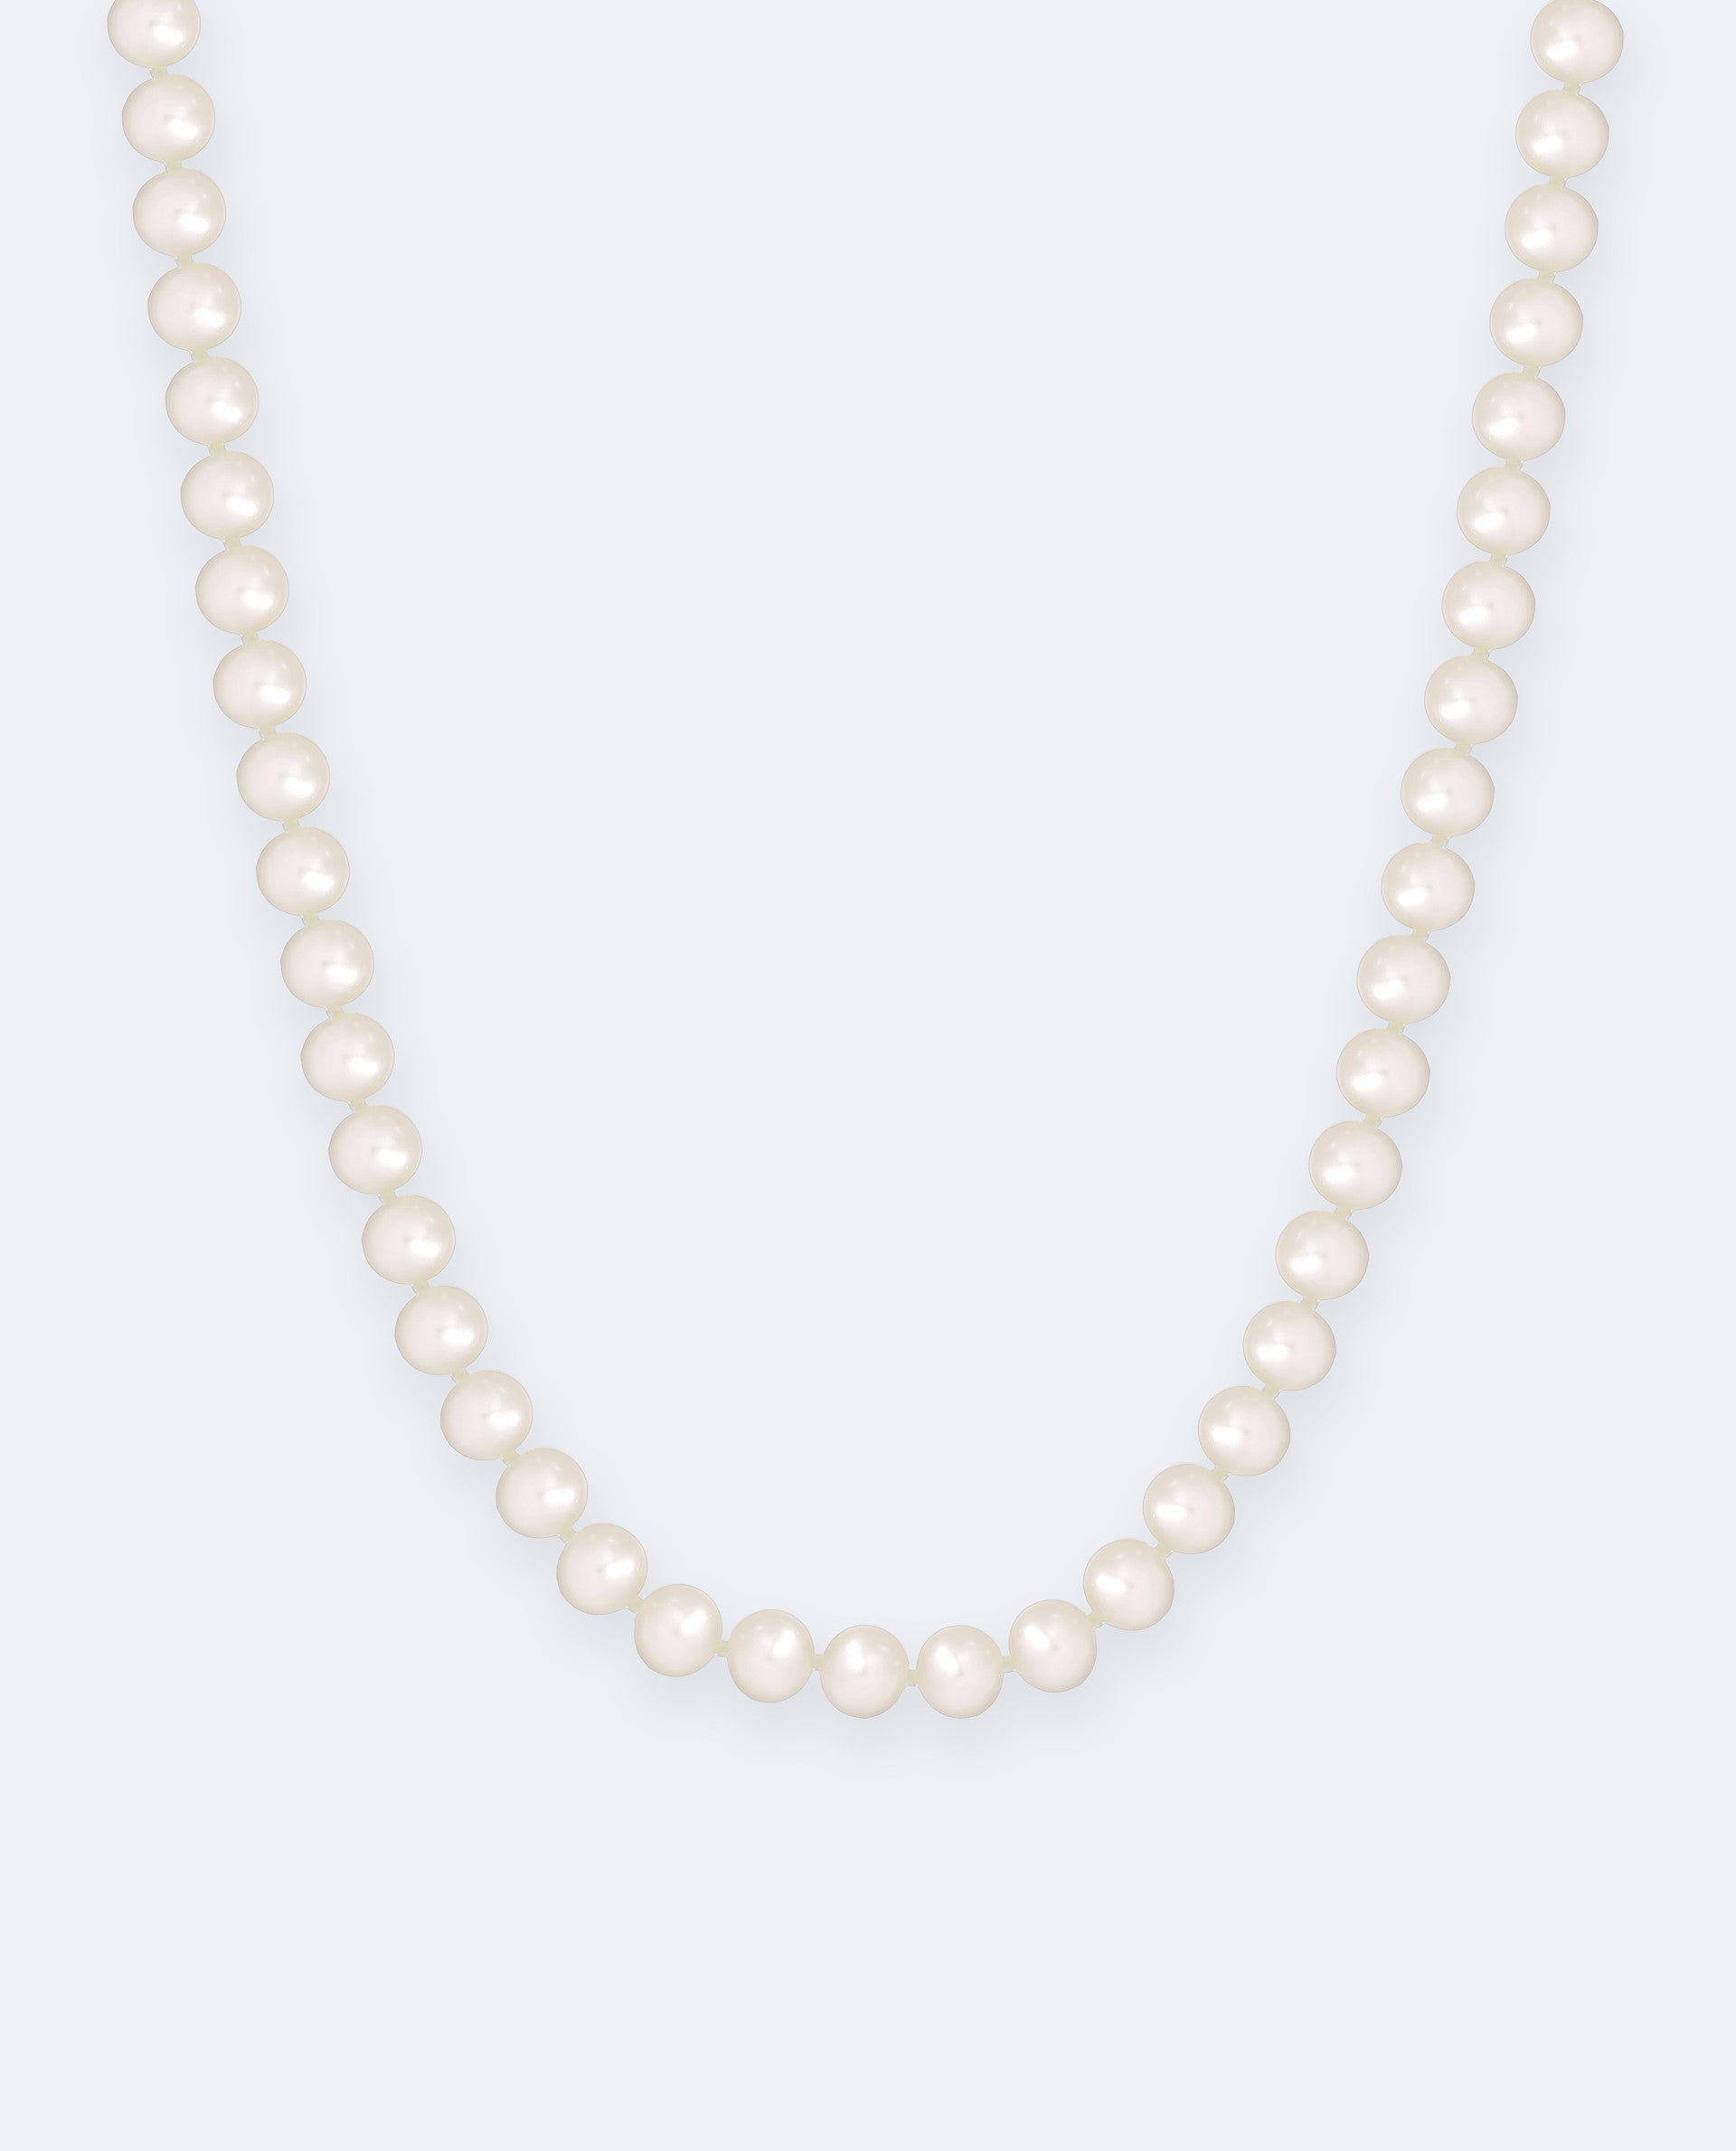 Root pearl necklace 51cm